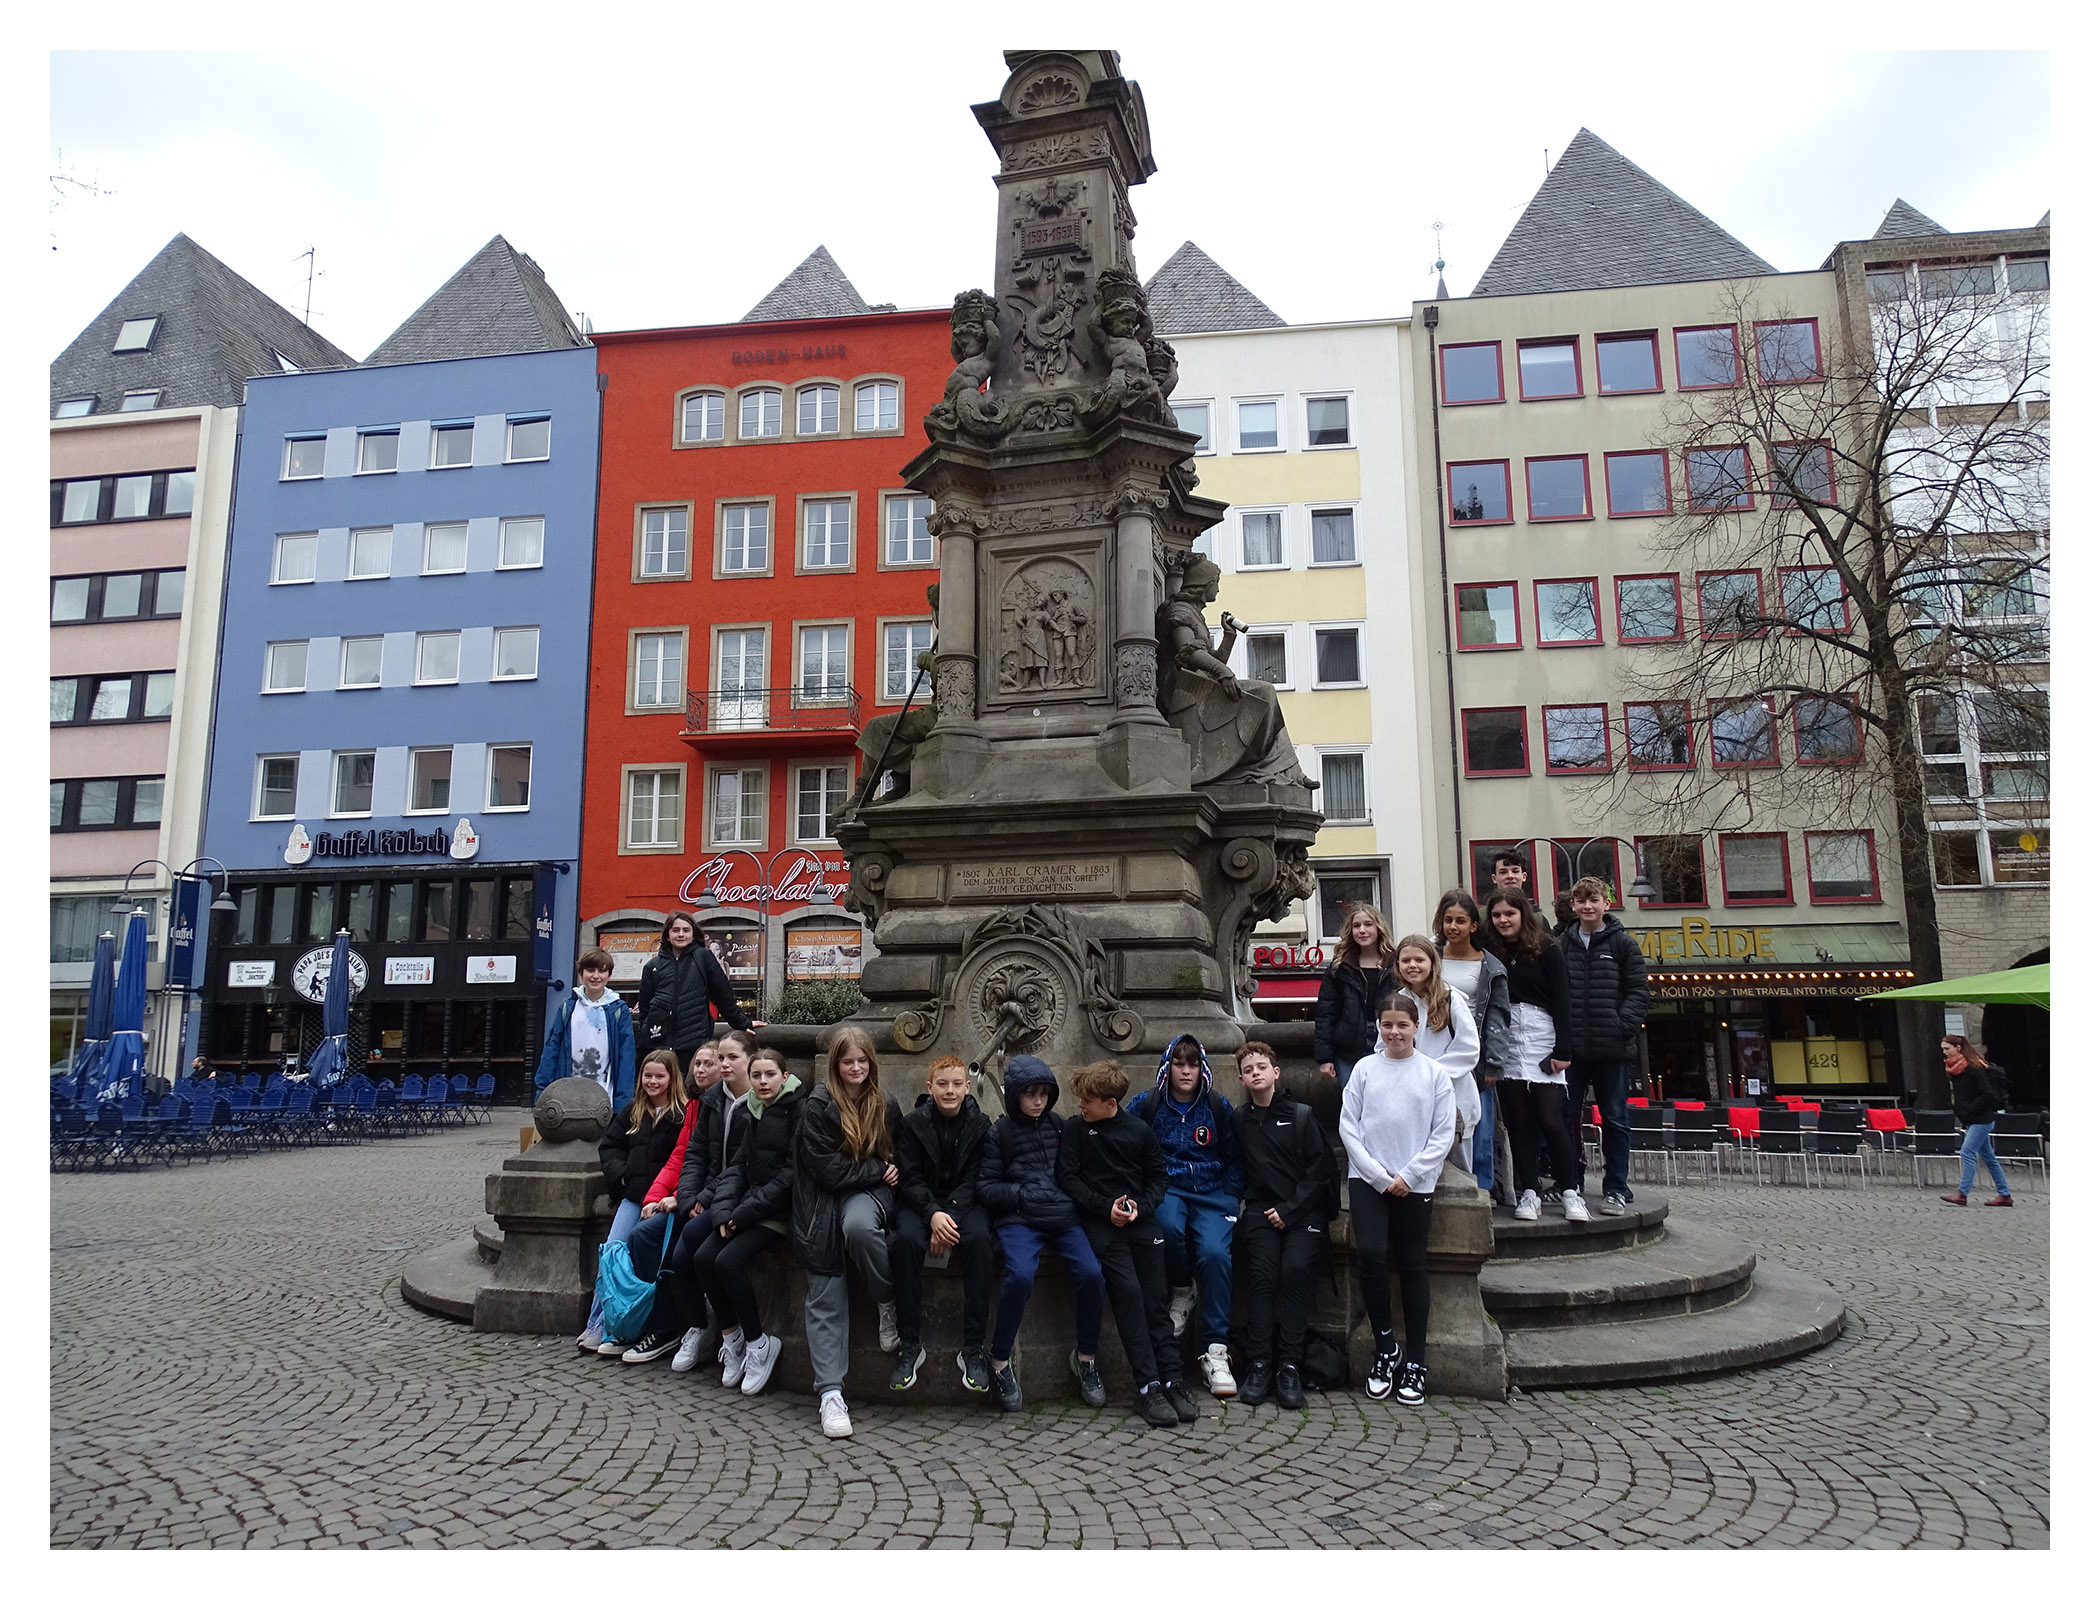 Second Year pupils pose for a photo at a water fountain during their trip to Germany